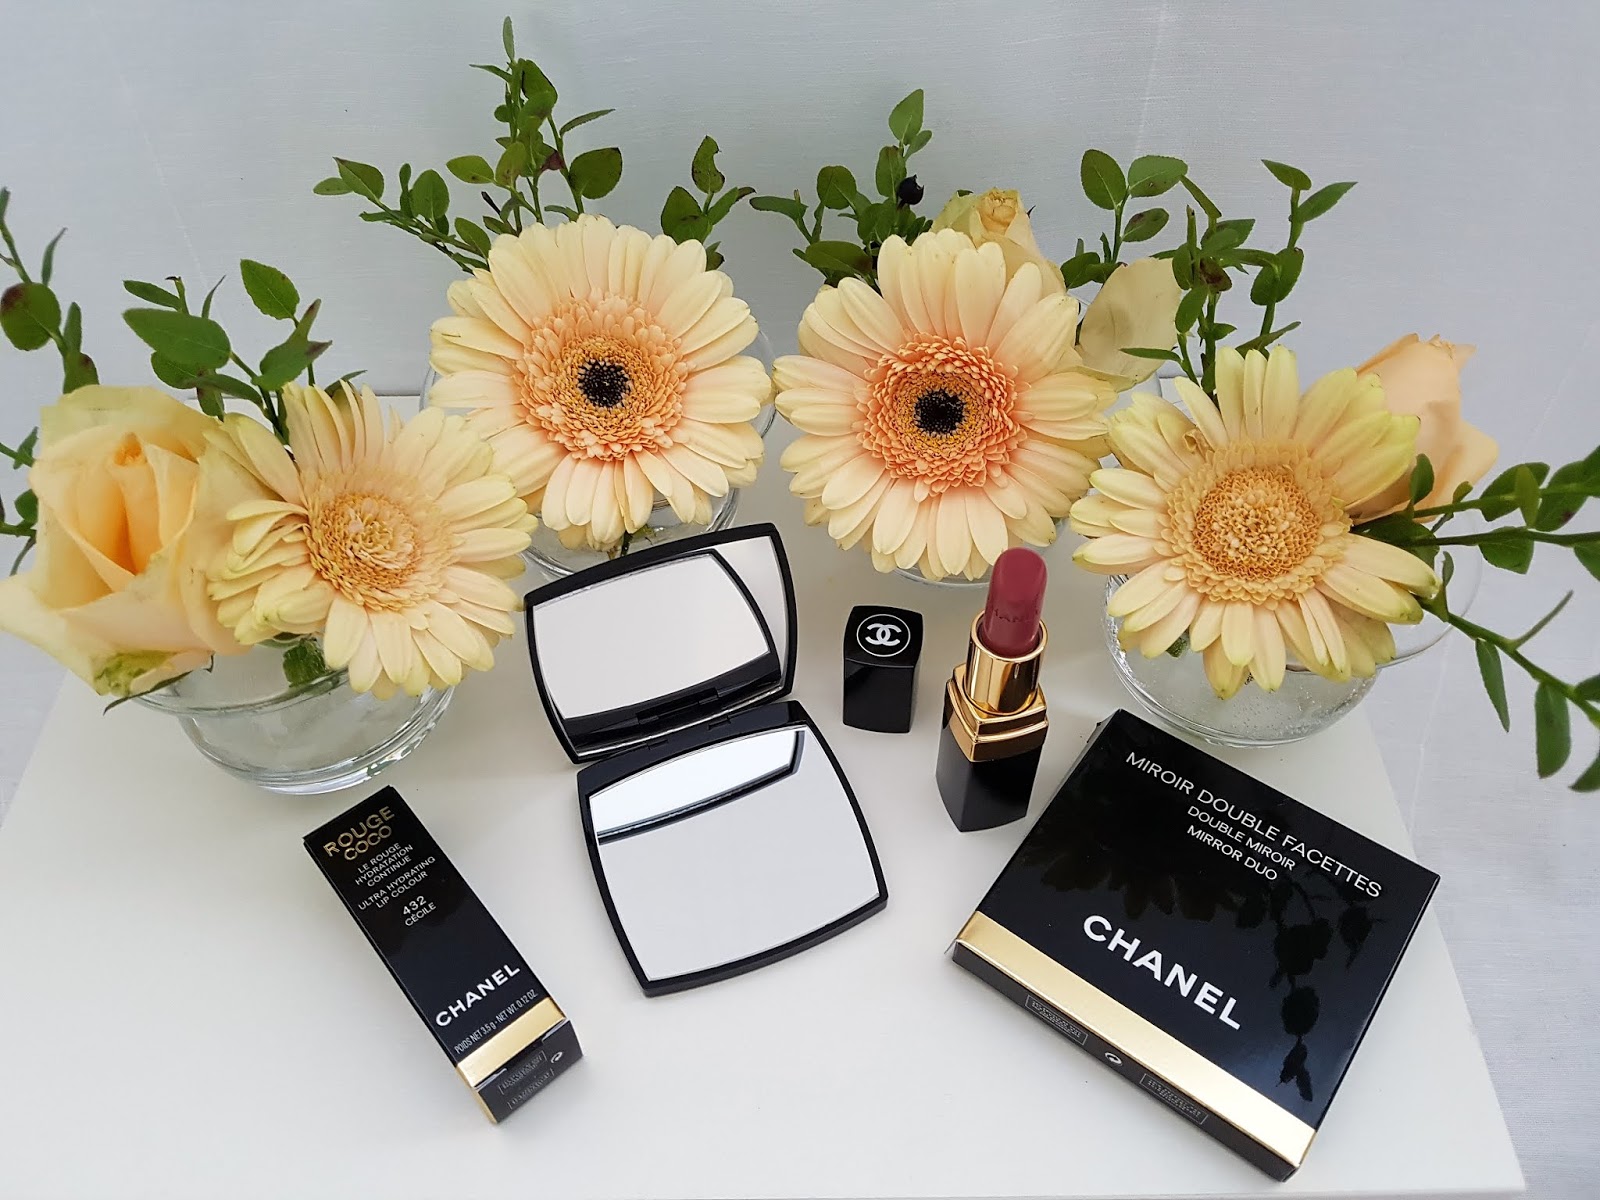 Chanel Beauty Roundup: 6 Mini-Reviews, Pros, Cons & Swatches